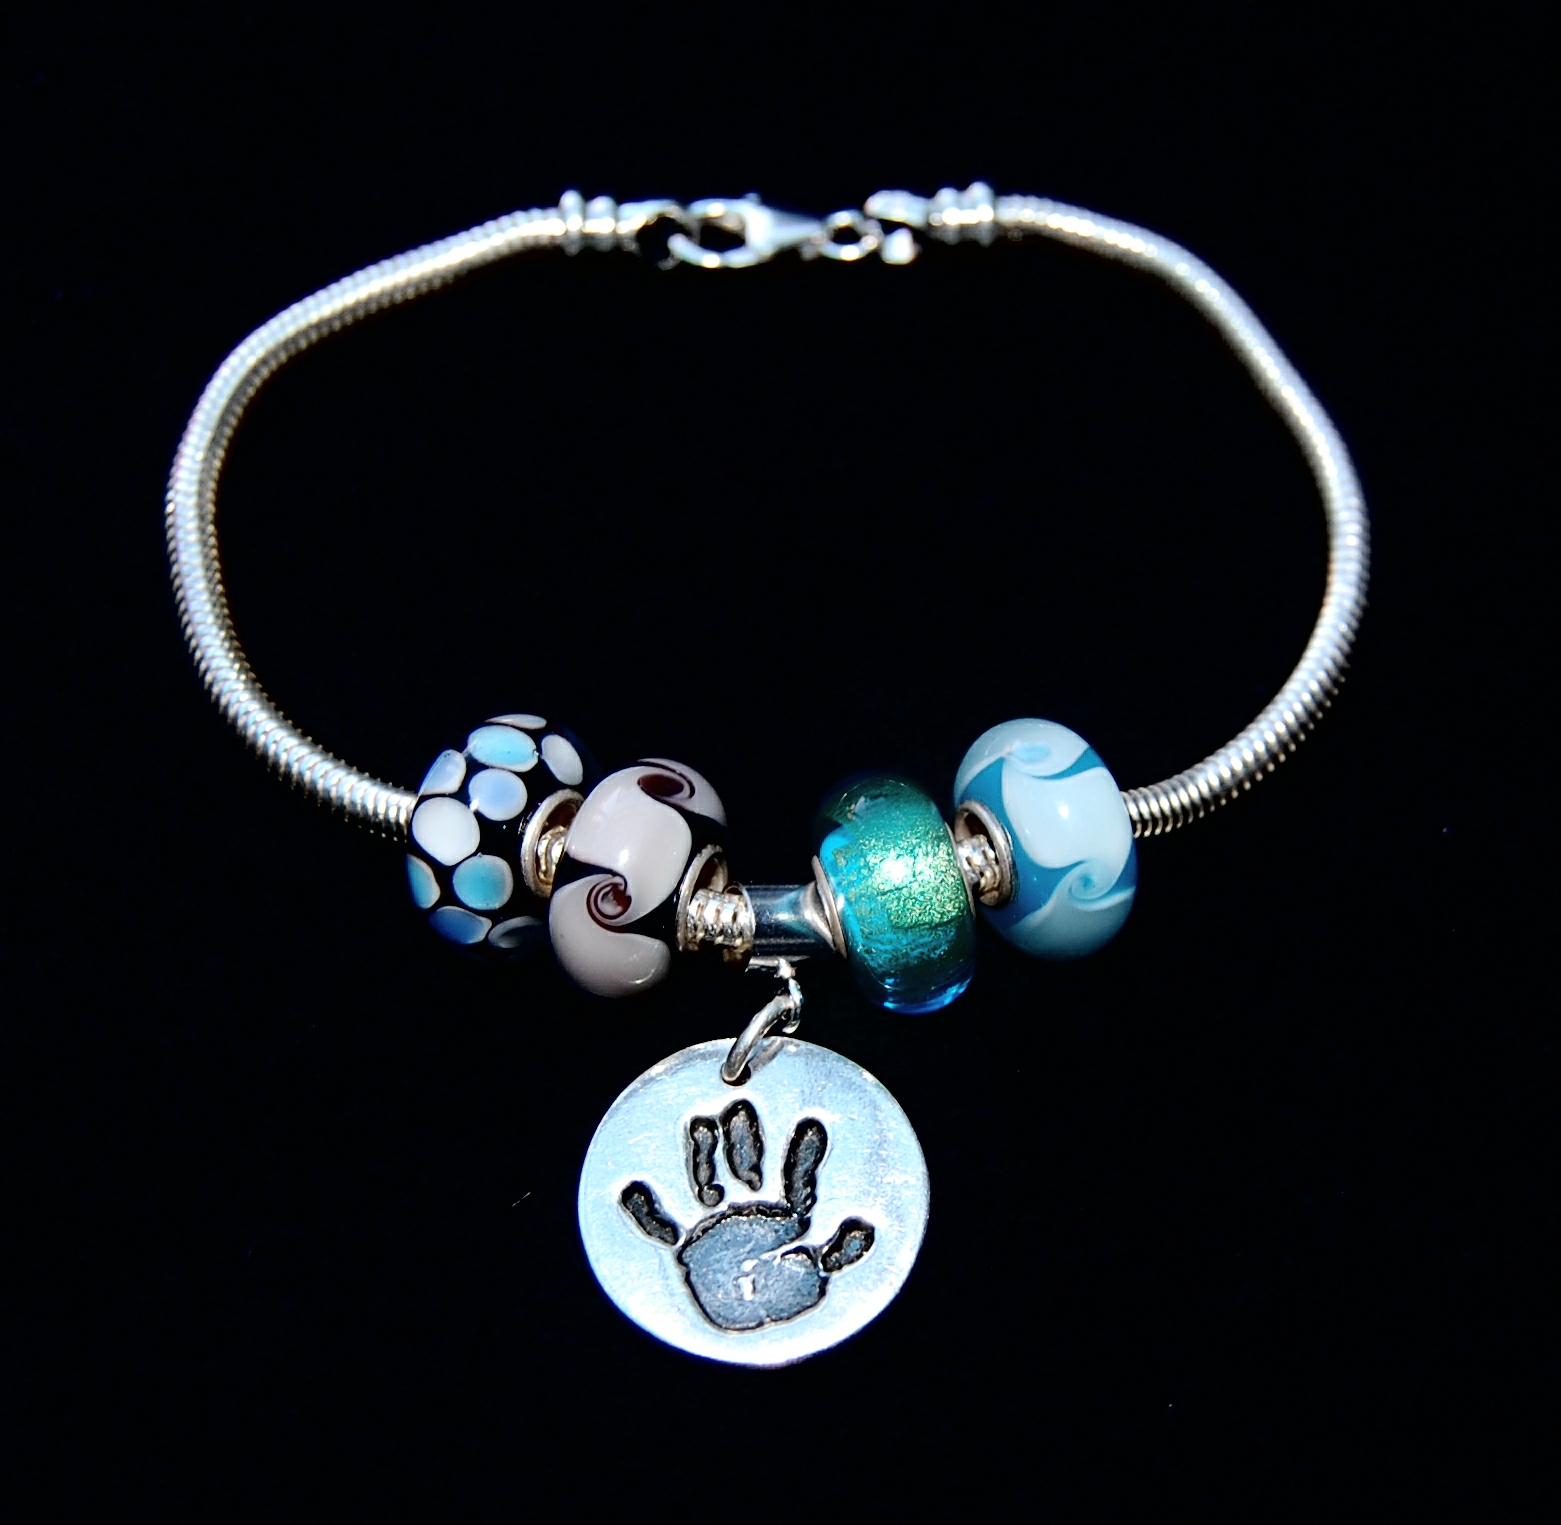 Small silver circle handprint charm with Pandora style charm carrier. Pandora style bracelet can be purchased separately.